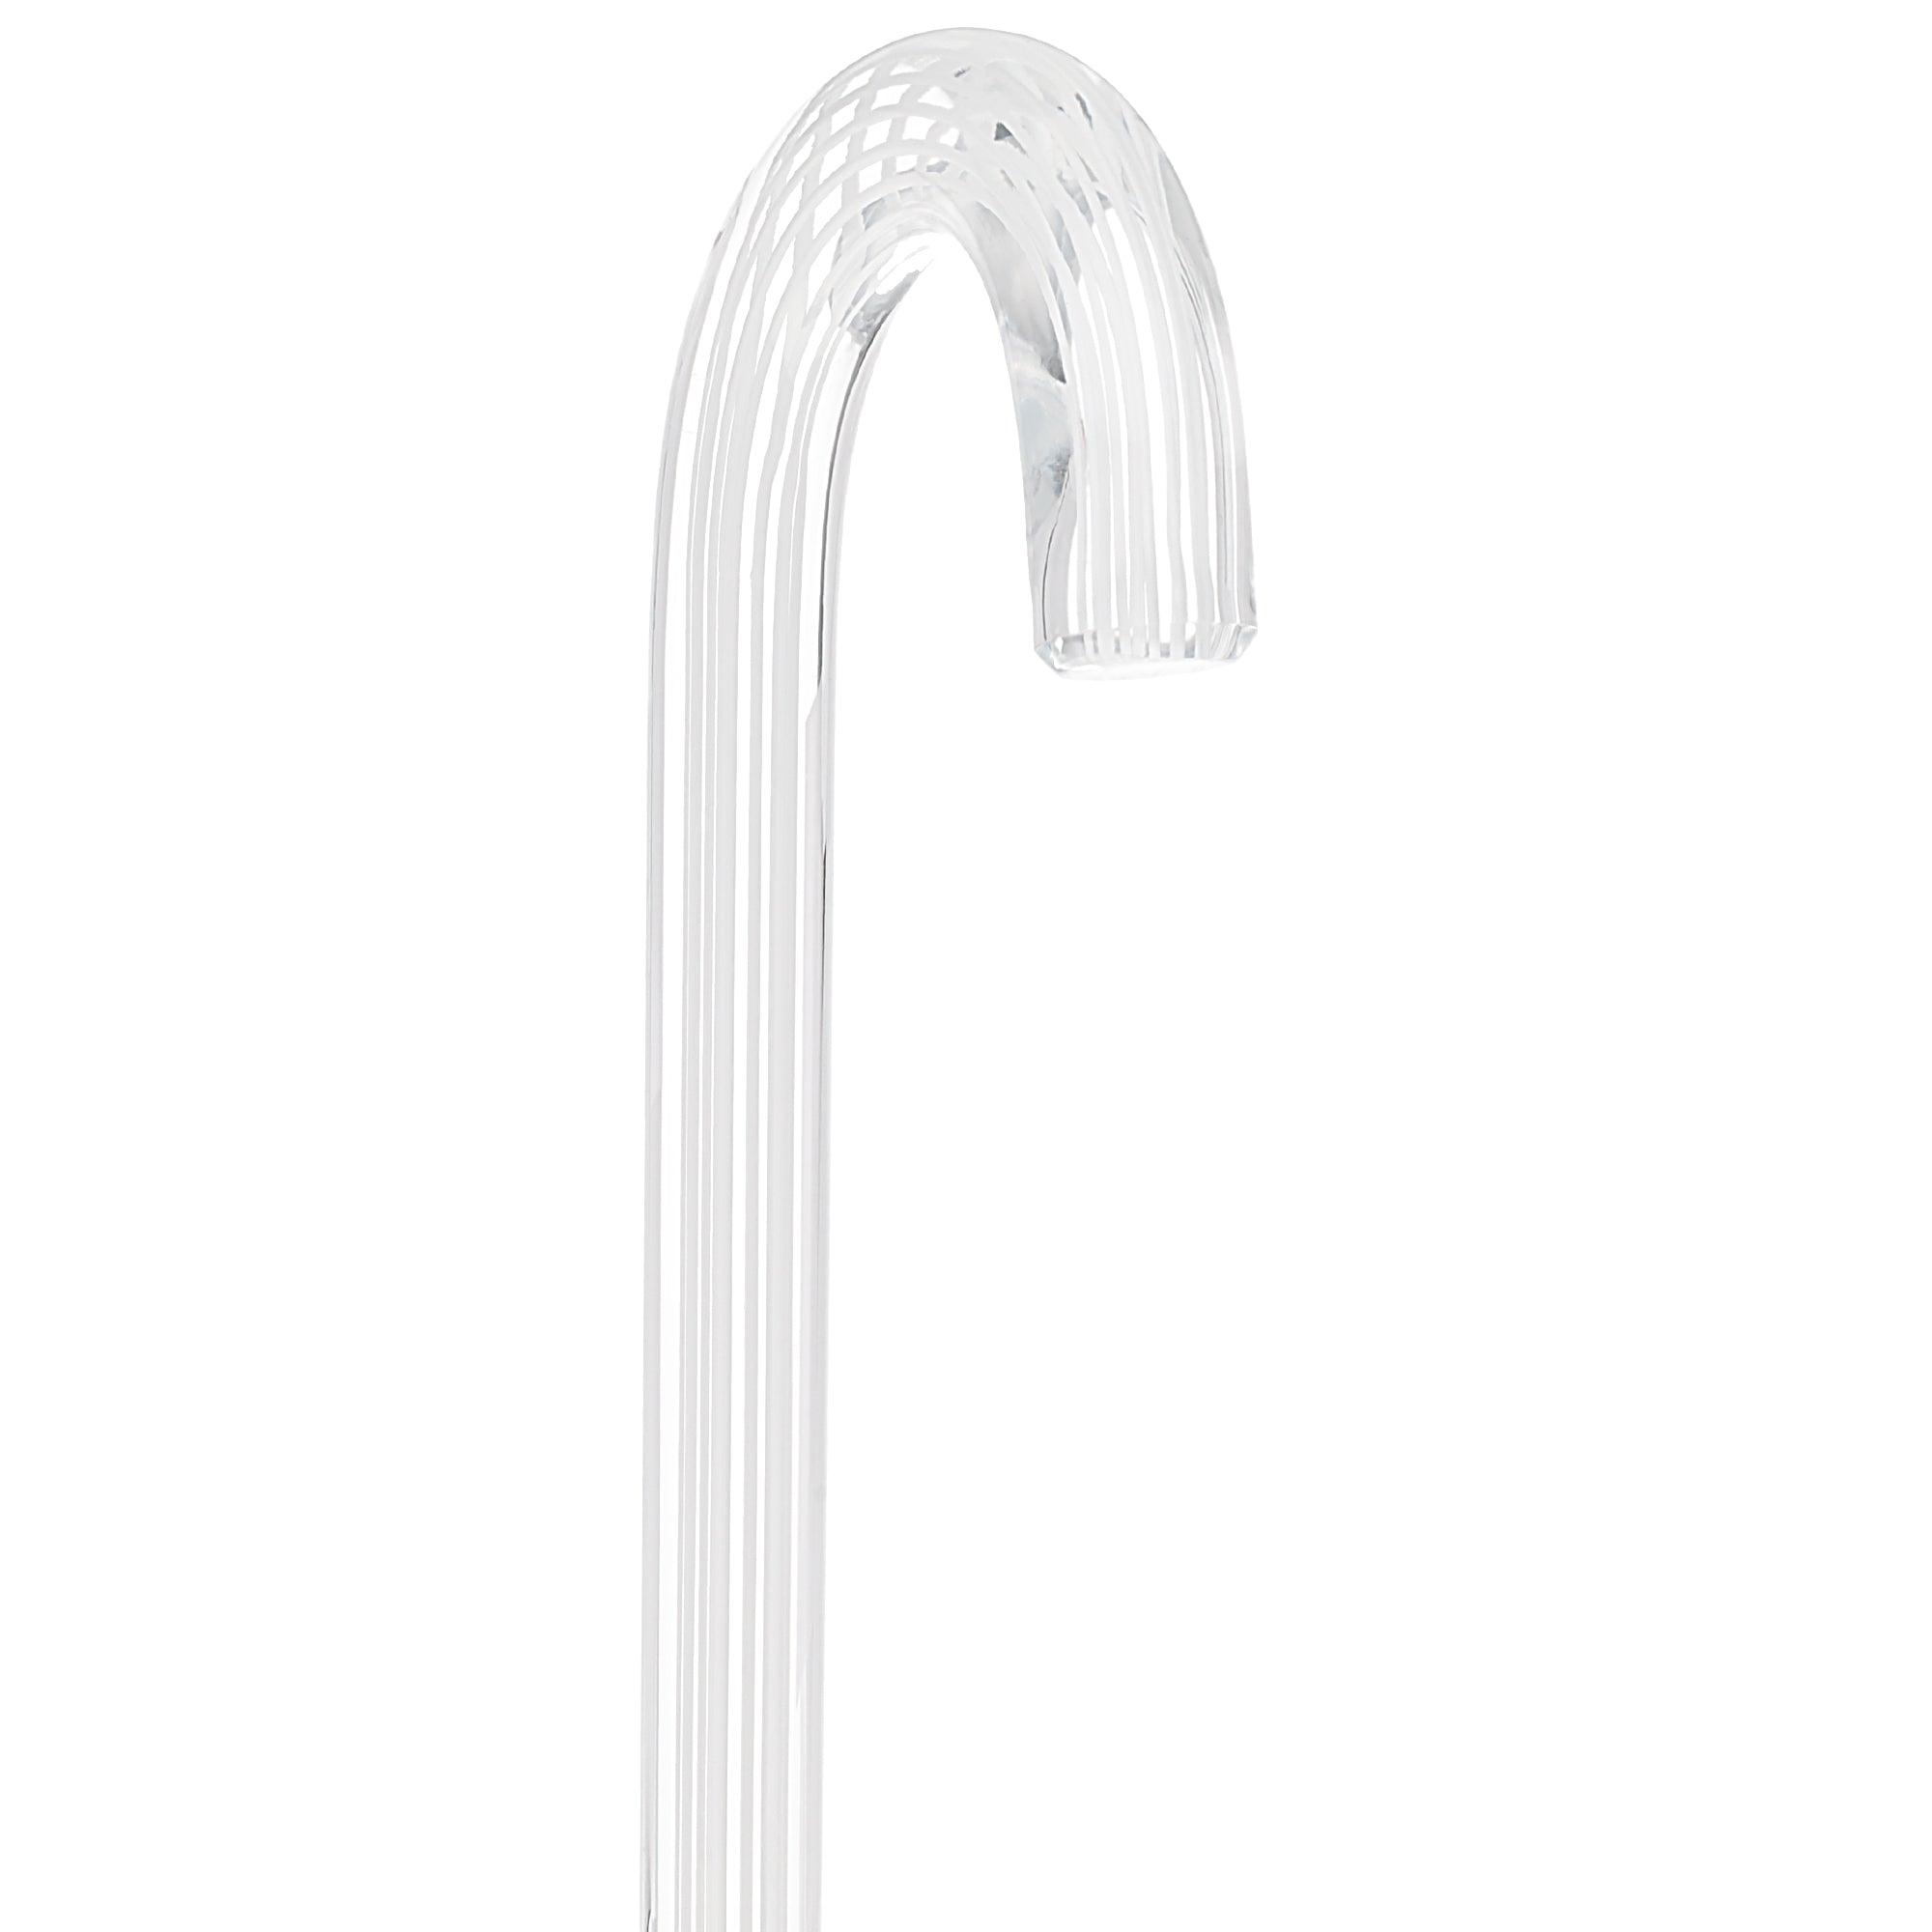 White Cane - White Cane Angle - CleanPNG / KissPNG